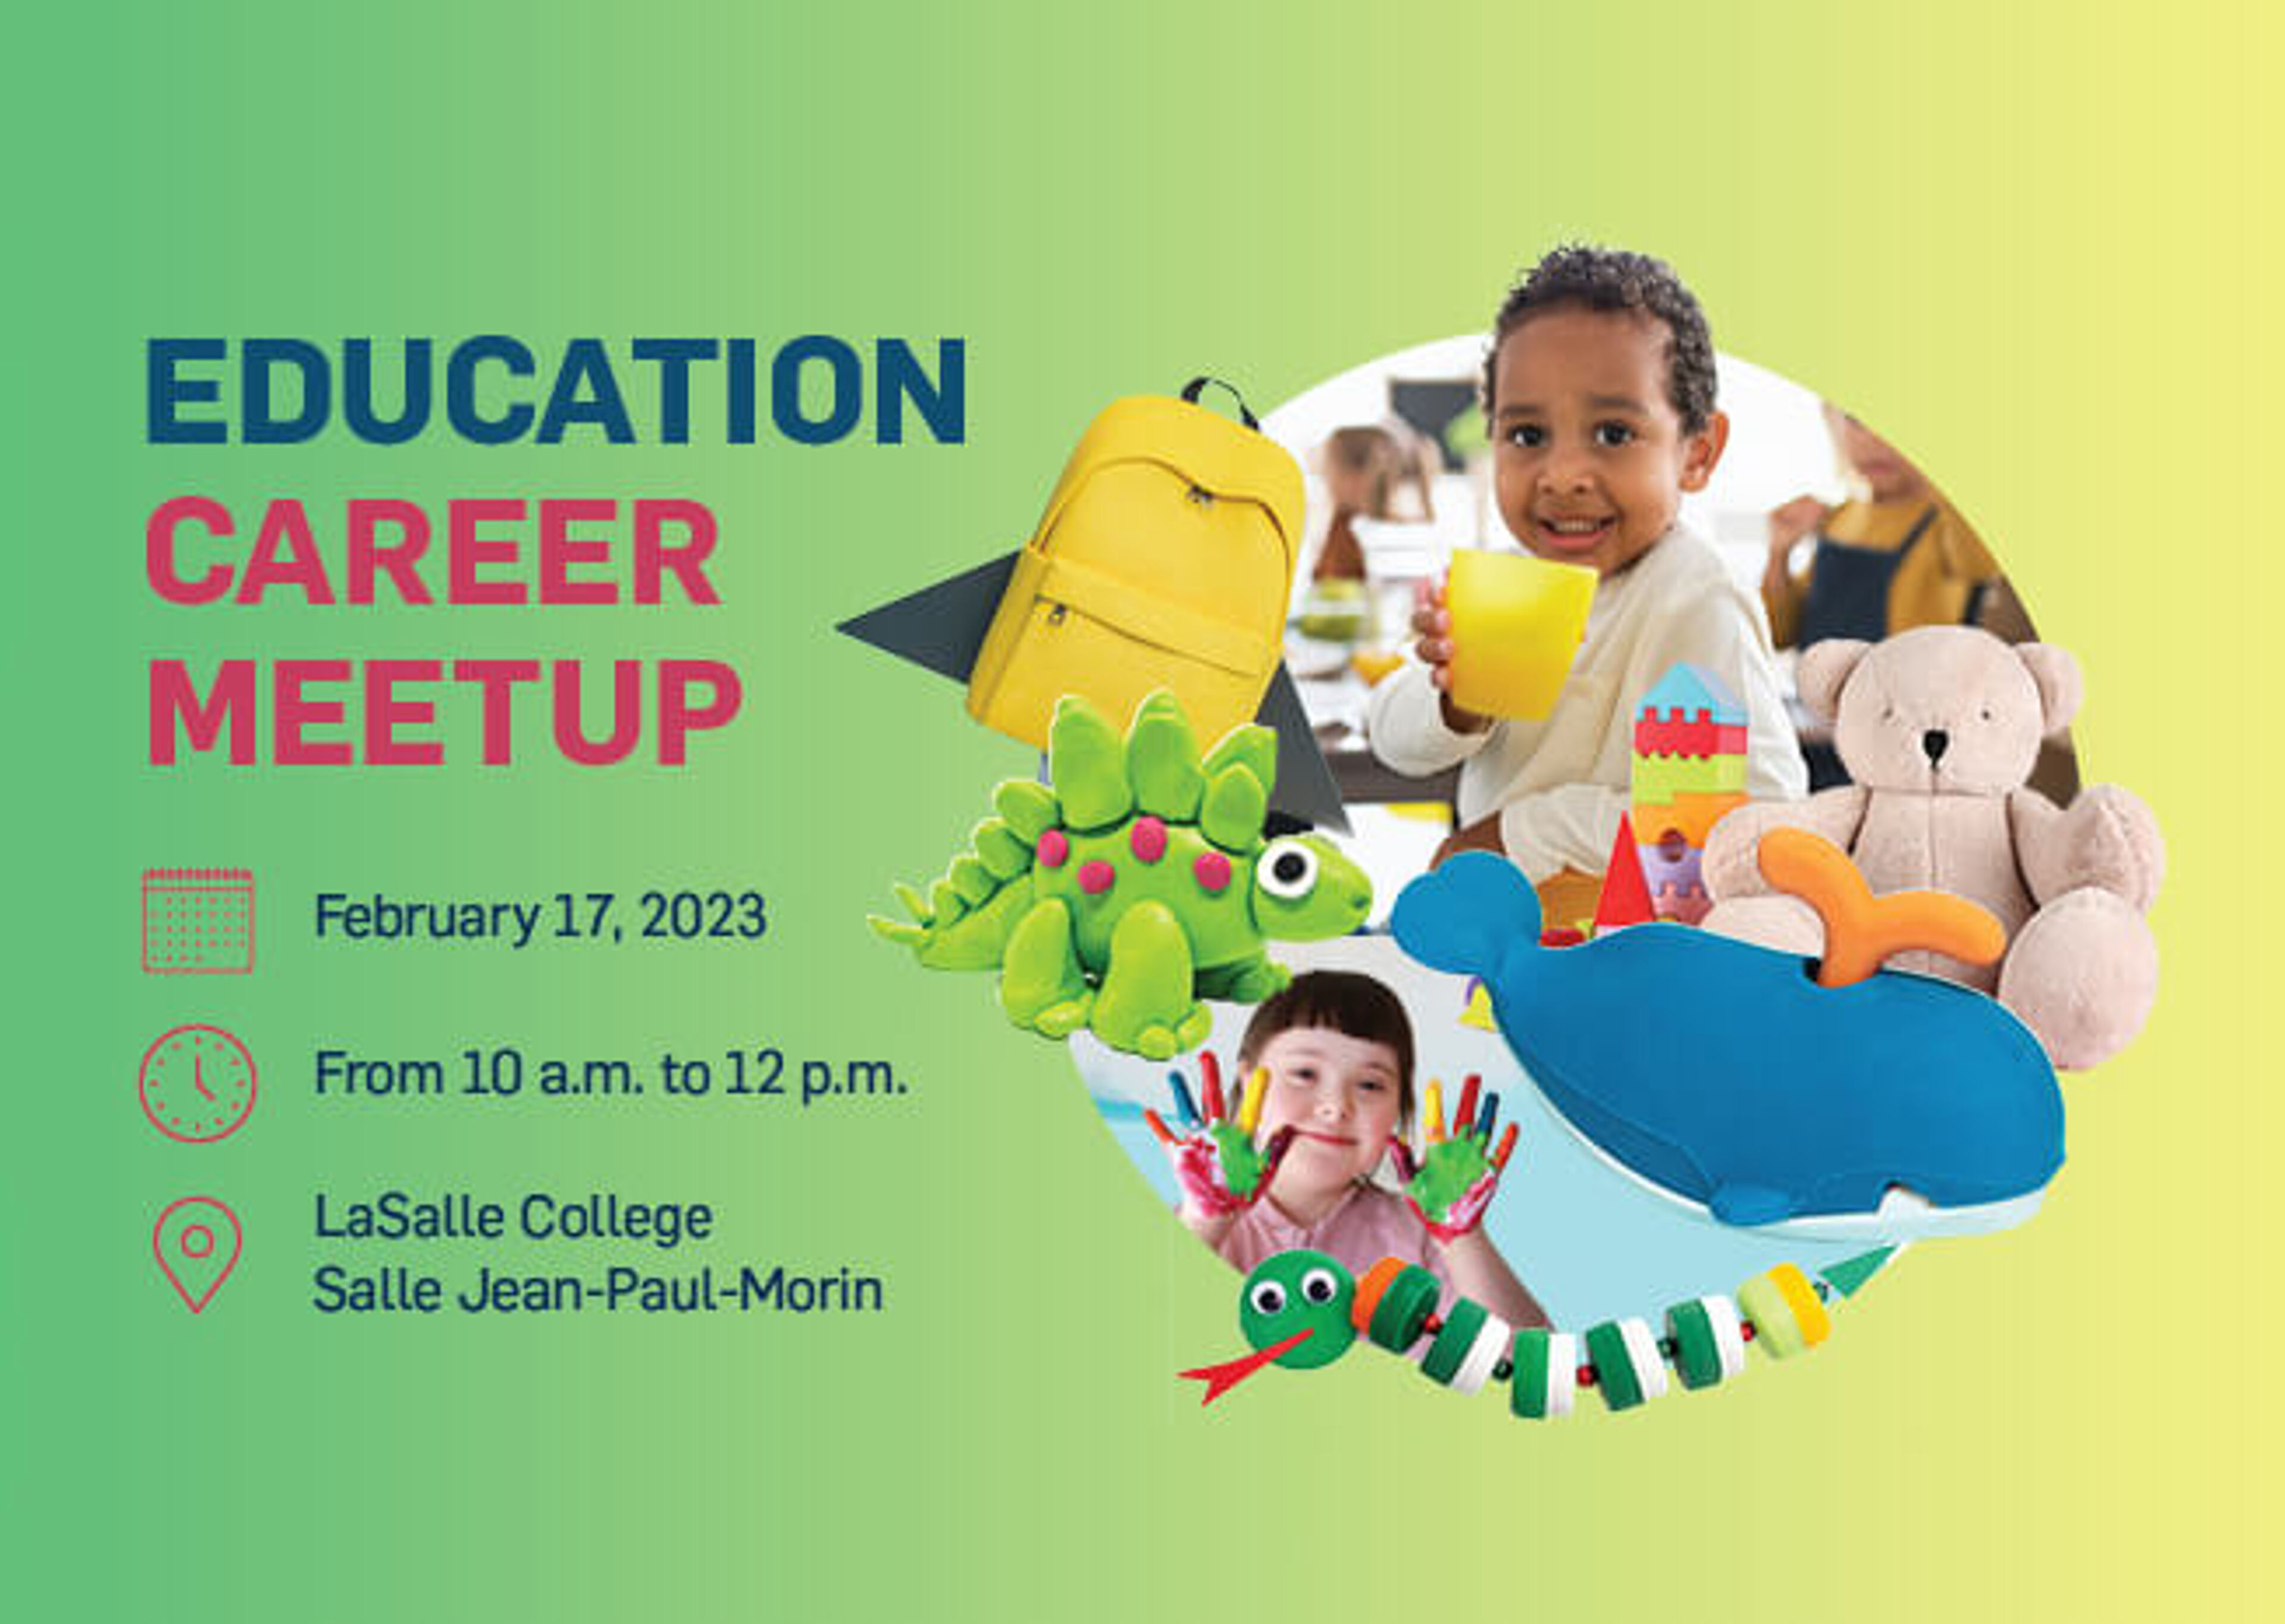 Invitation to an Education Career Meetup on February 17, 2023, featuring cheerful children's toys and activities, at LaSalle College.